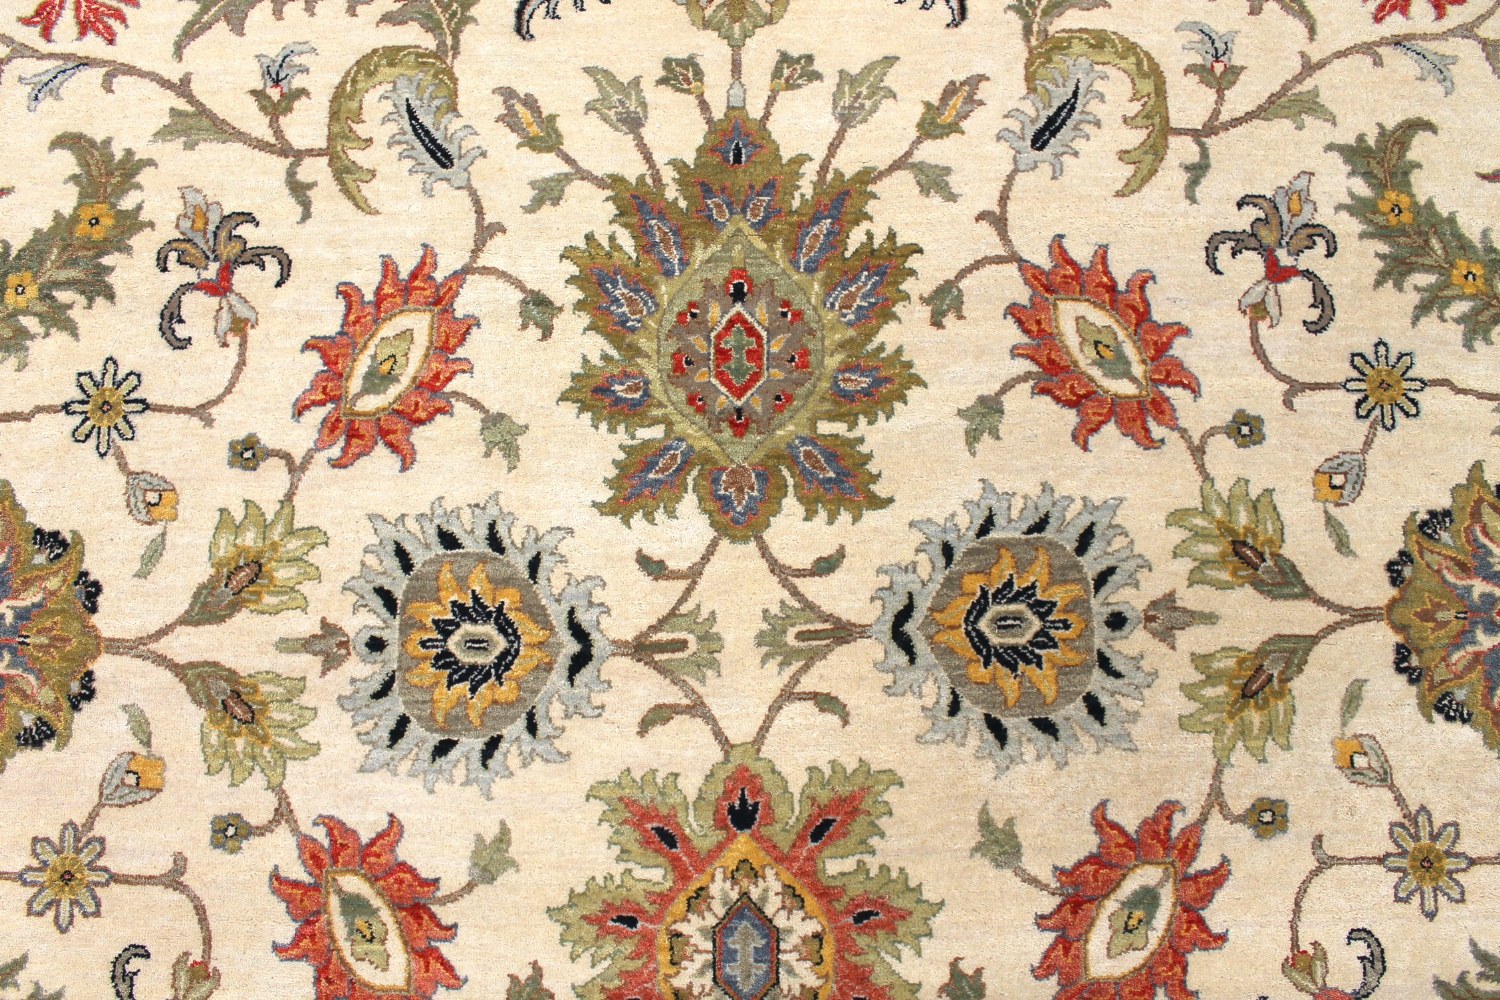 10x14 Traditional Hand Knotted Wool Area Rug - MR027860